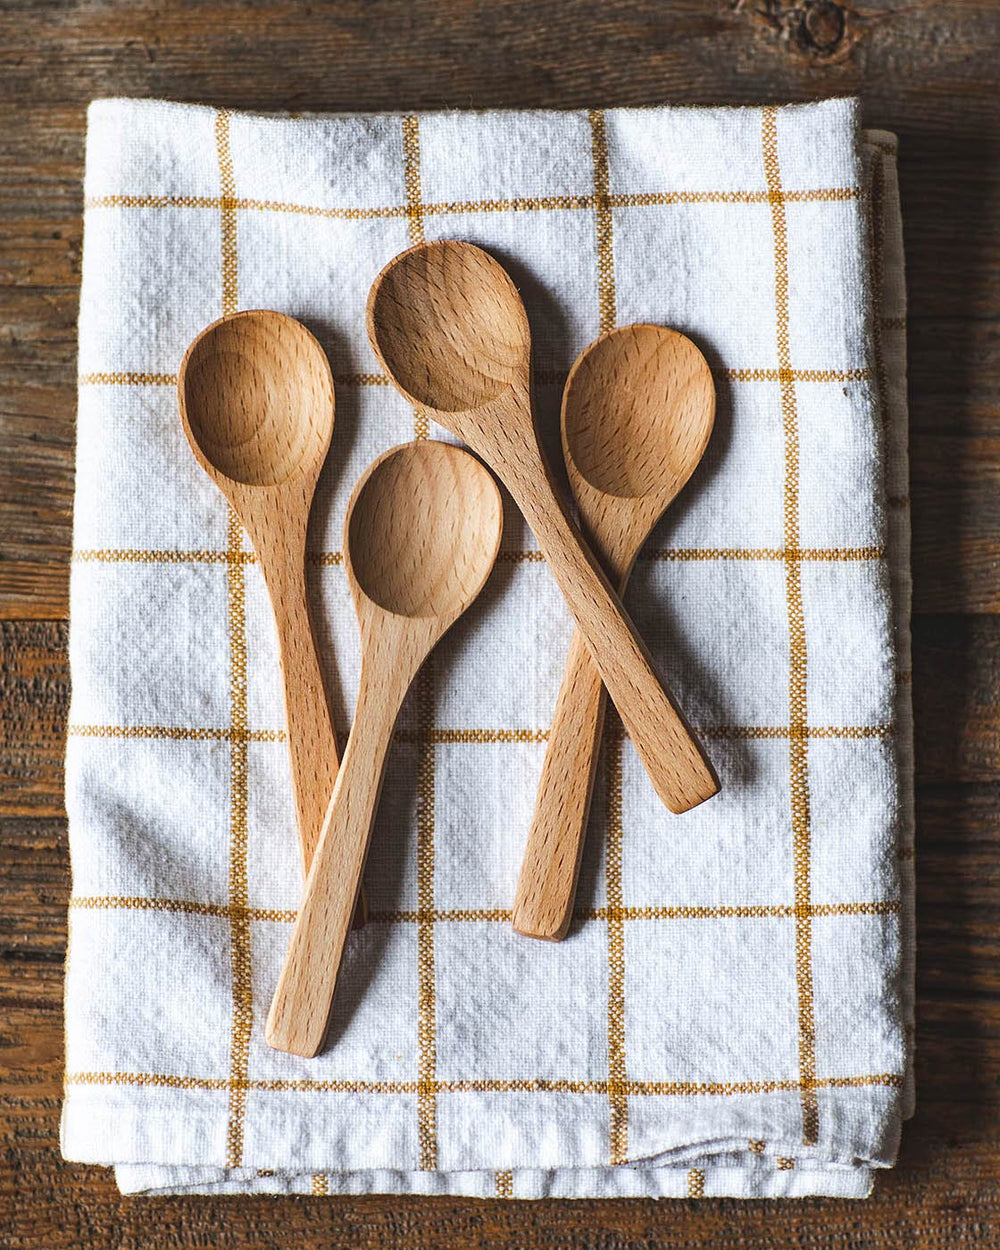 Mr. Woodware mr.woodware 2 pcs wooden scoops - 6 inch natural beech wood  measuring mini scoop set for coffee, flour, sugar, spice, powder